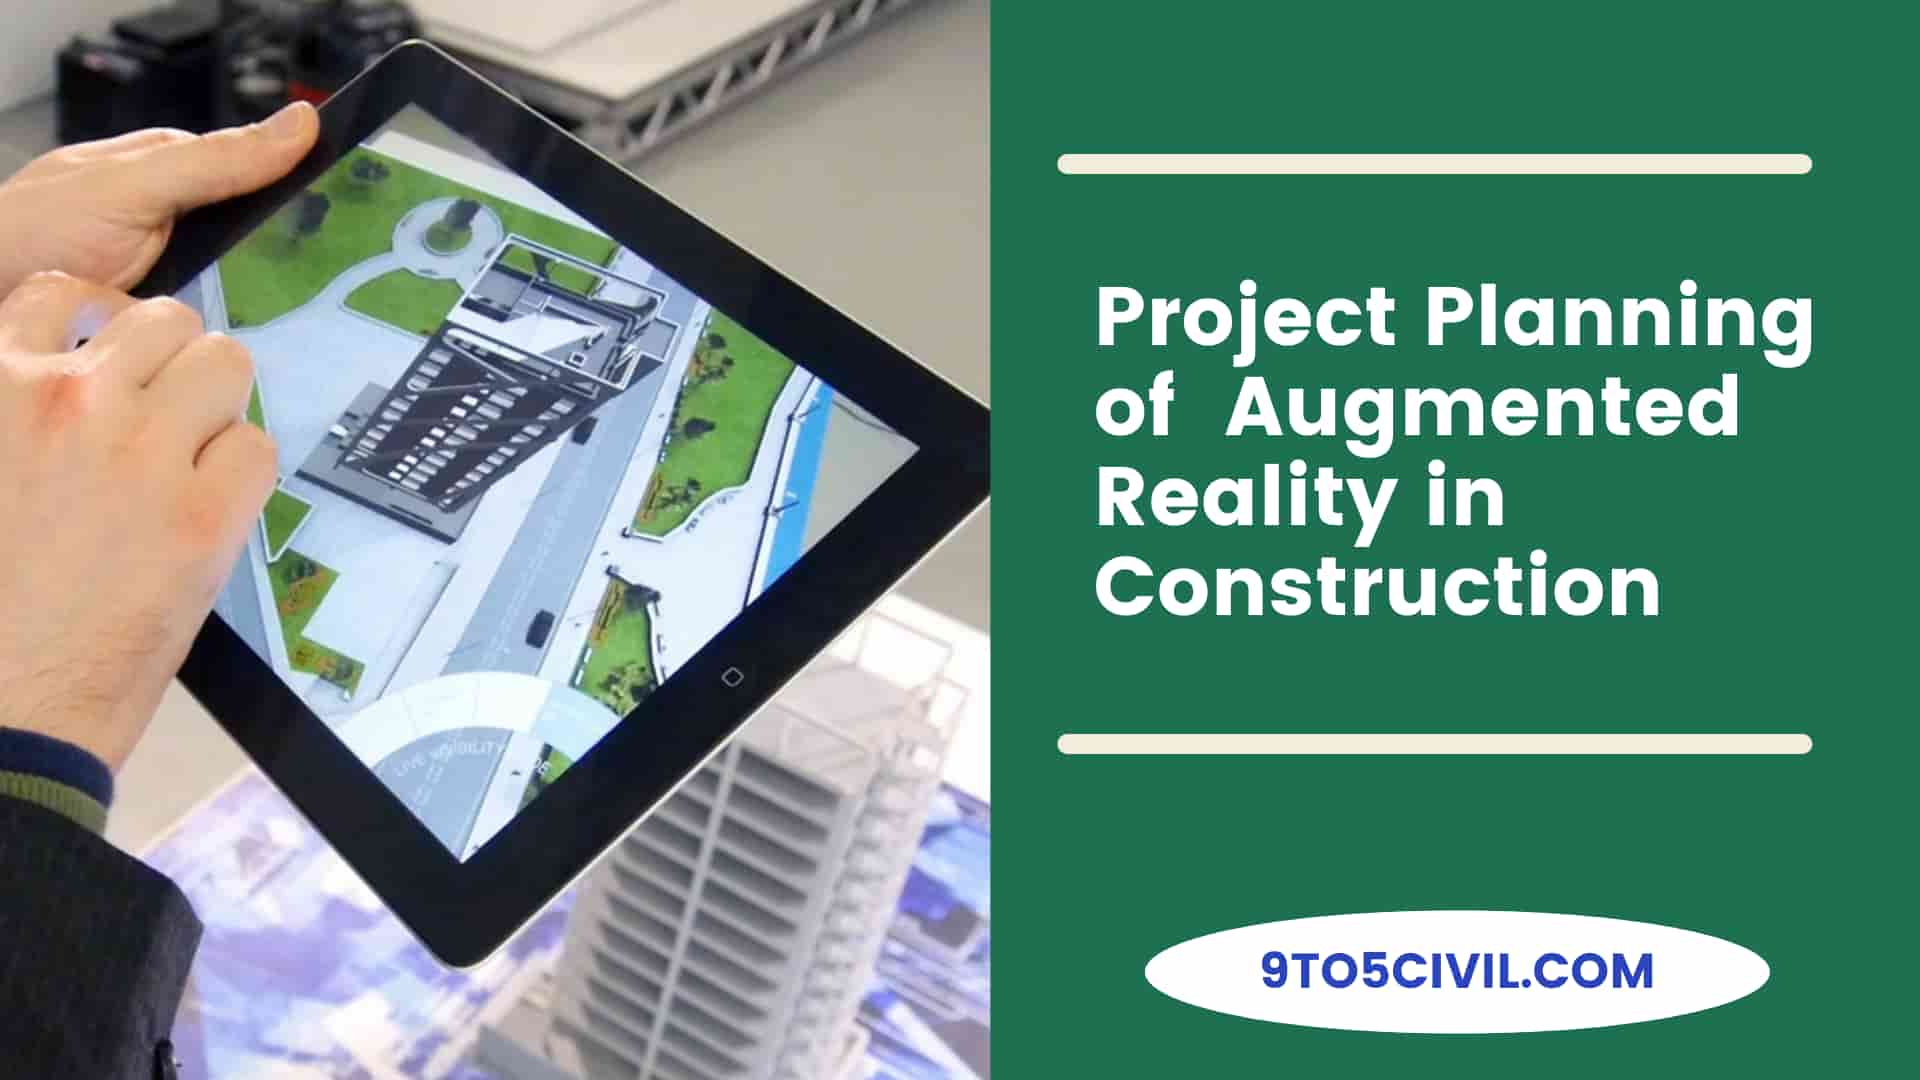 Project Planning of Augmented Reality in Construction (1)